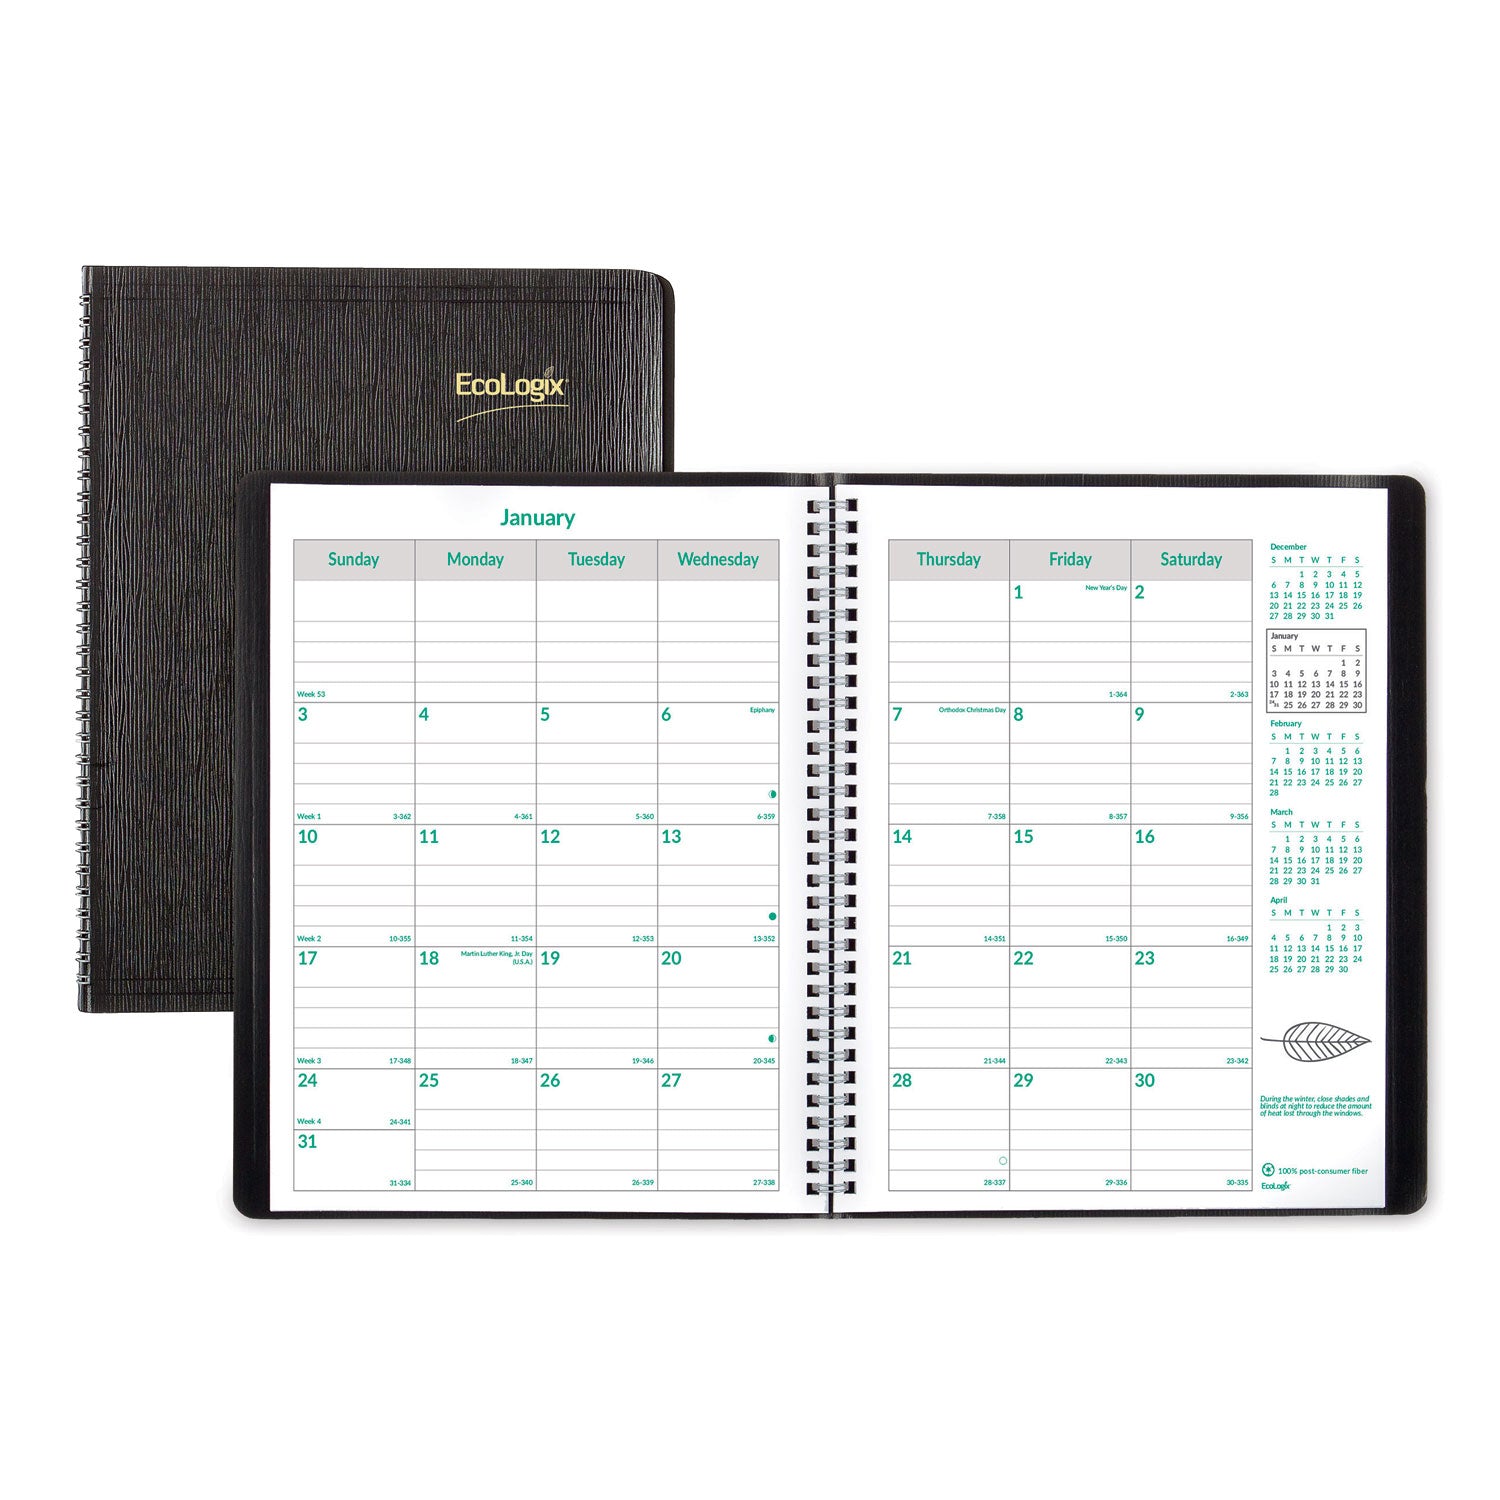 ecologix-recycled-monthly-planner-ecologix-artwork-11-x-85-black-cover-14-month-dec-to-jan-2023-to-2025_redcb435wblk - 1